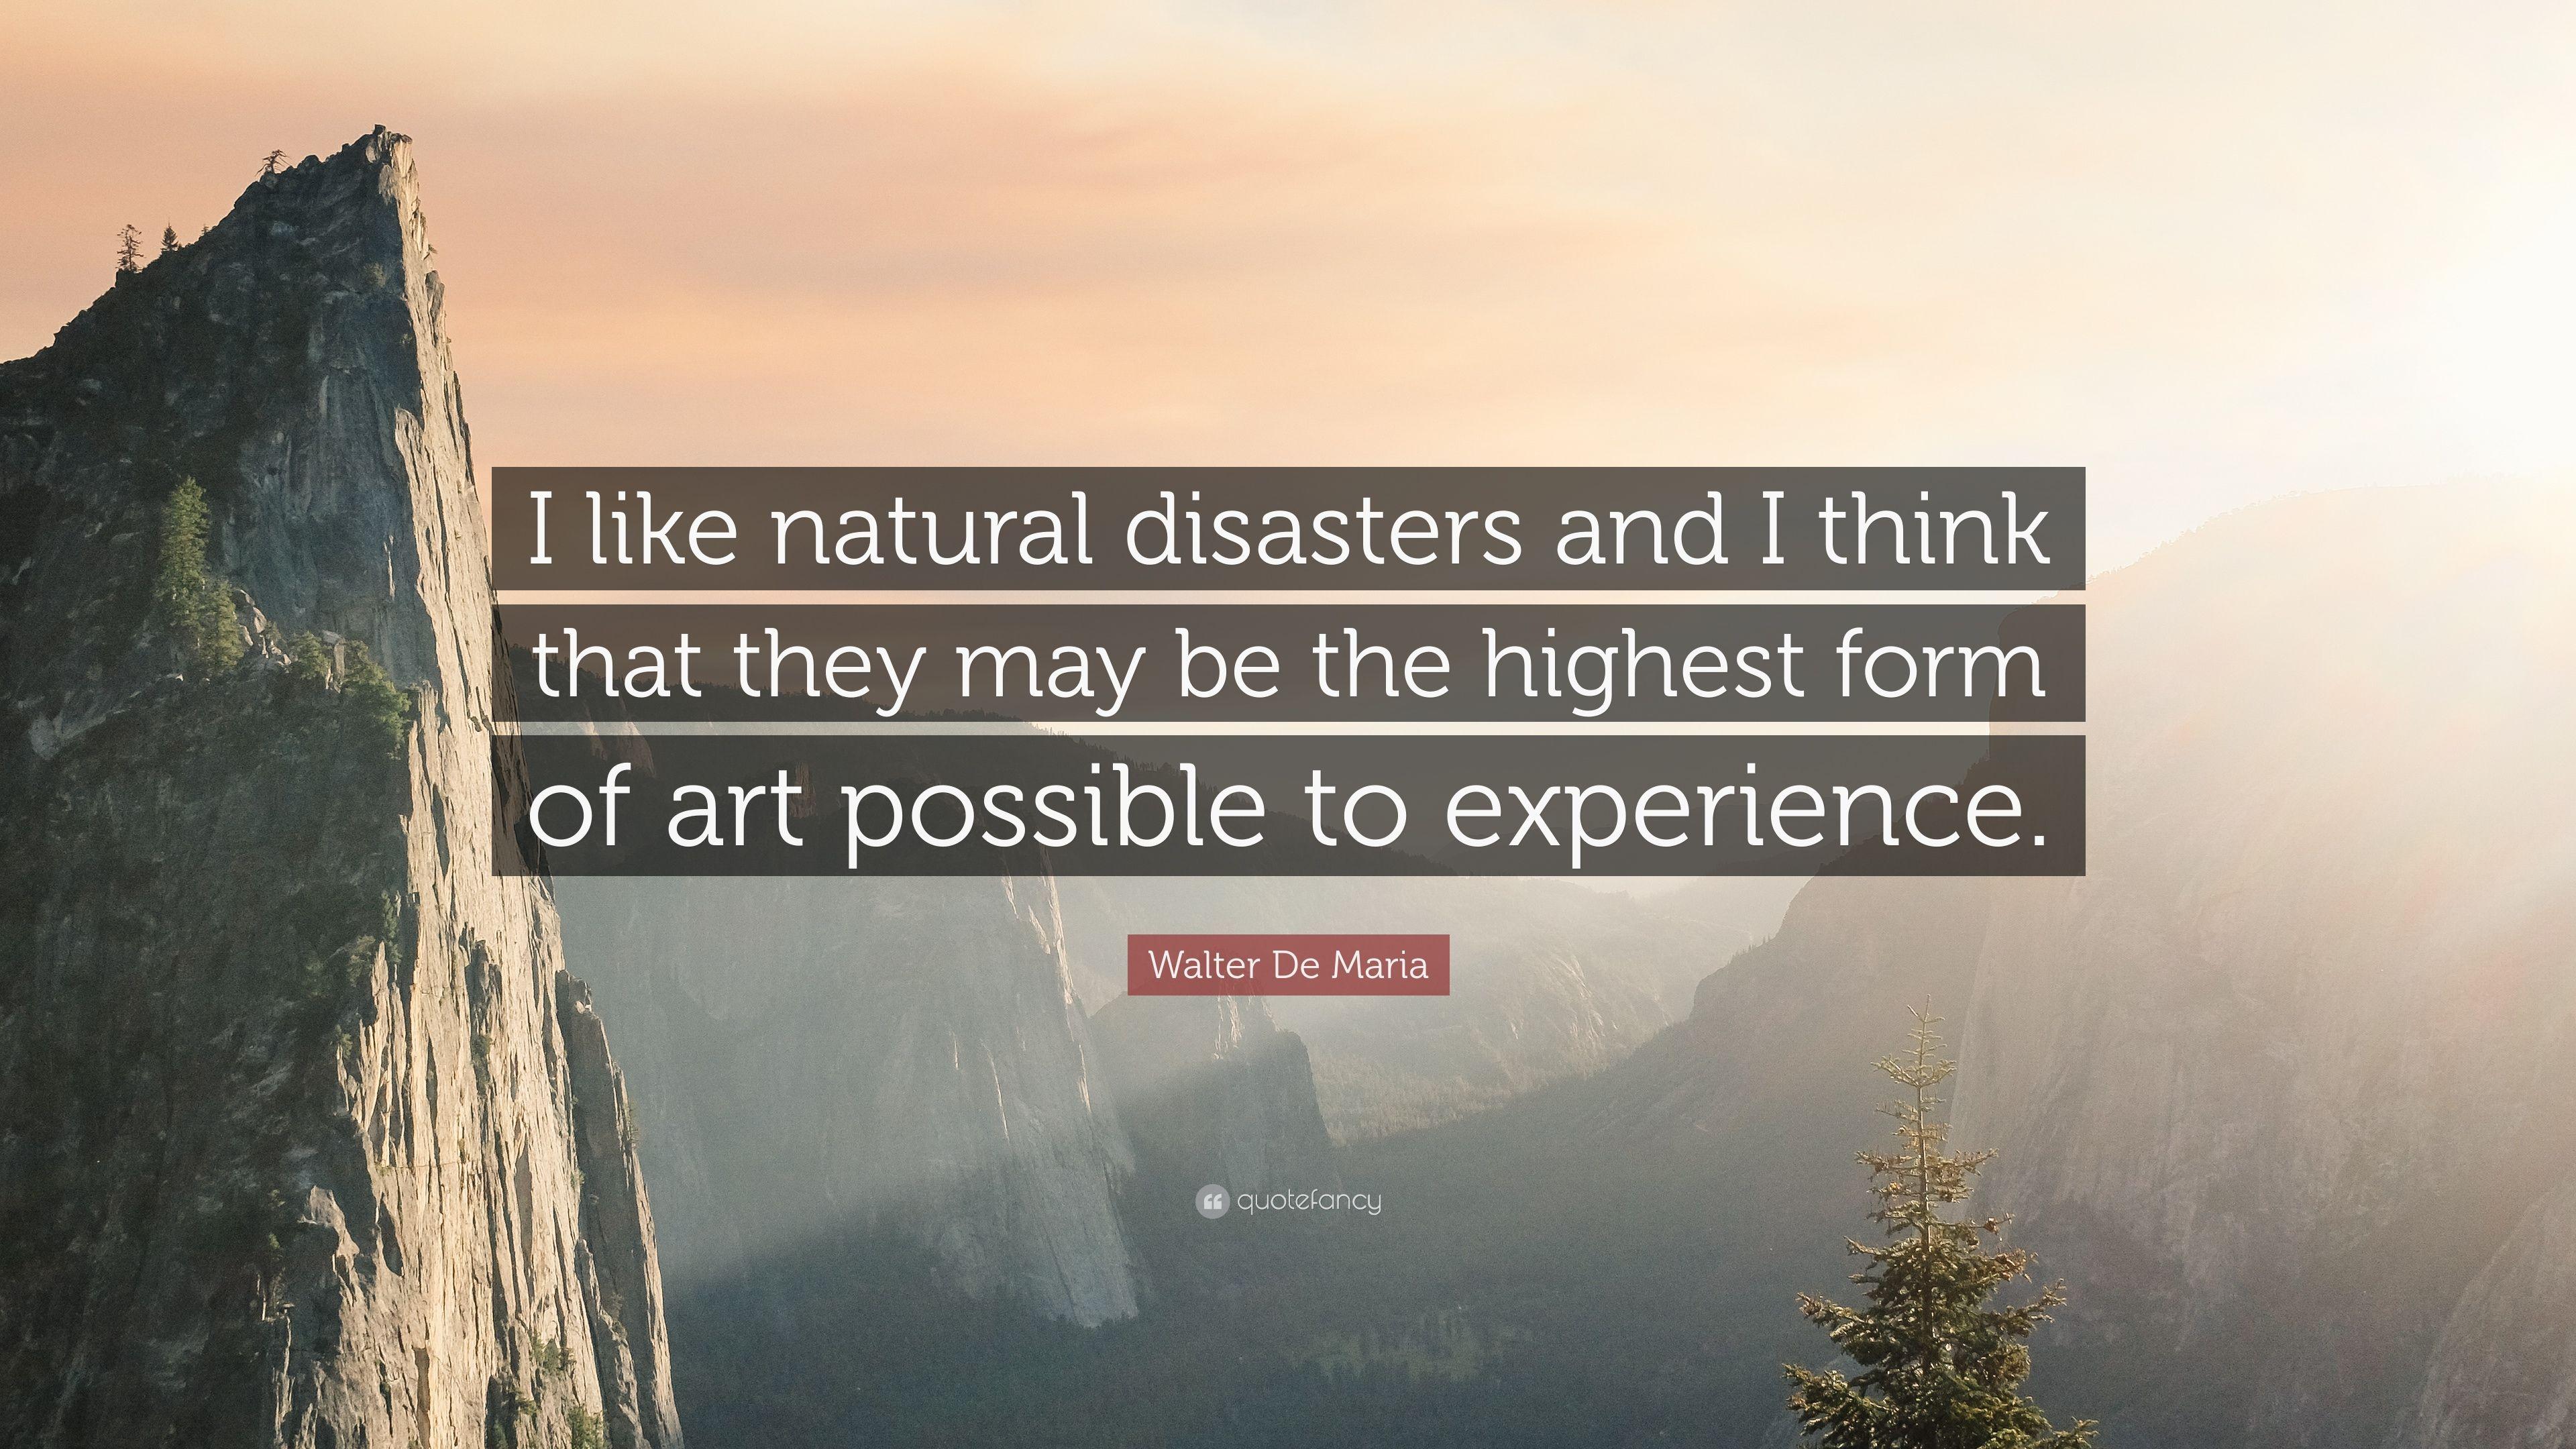 Walter De Maria Quote: “I like natural disasters and I think that